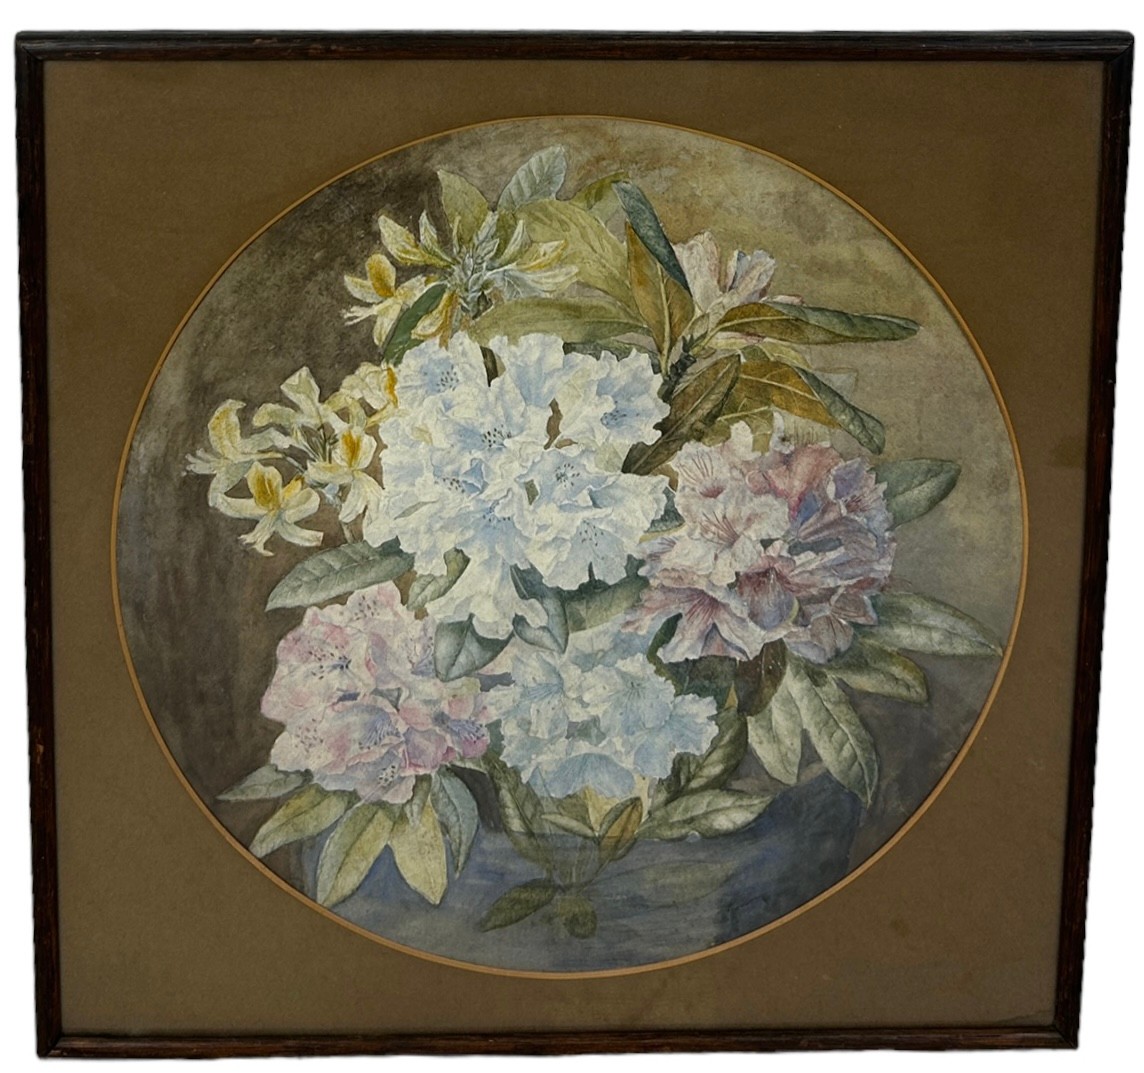 A WATERCOLOUR PAINTING ON PAPER DEPICTING FLOWERS, 42cm x 42cm In circular mount, framed and glazed.